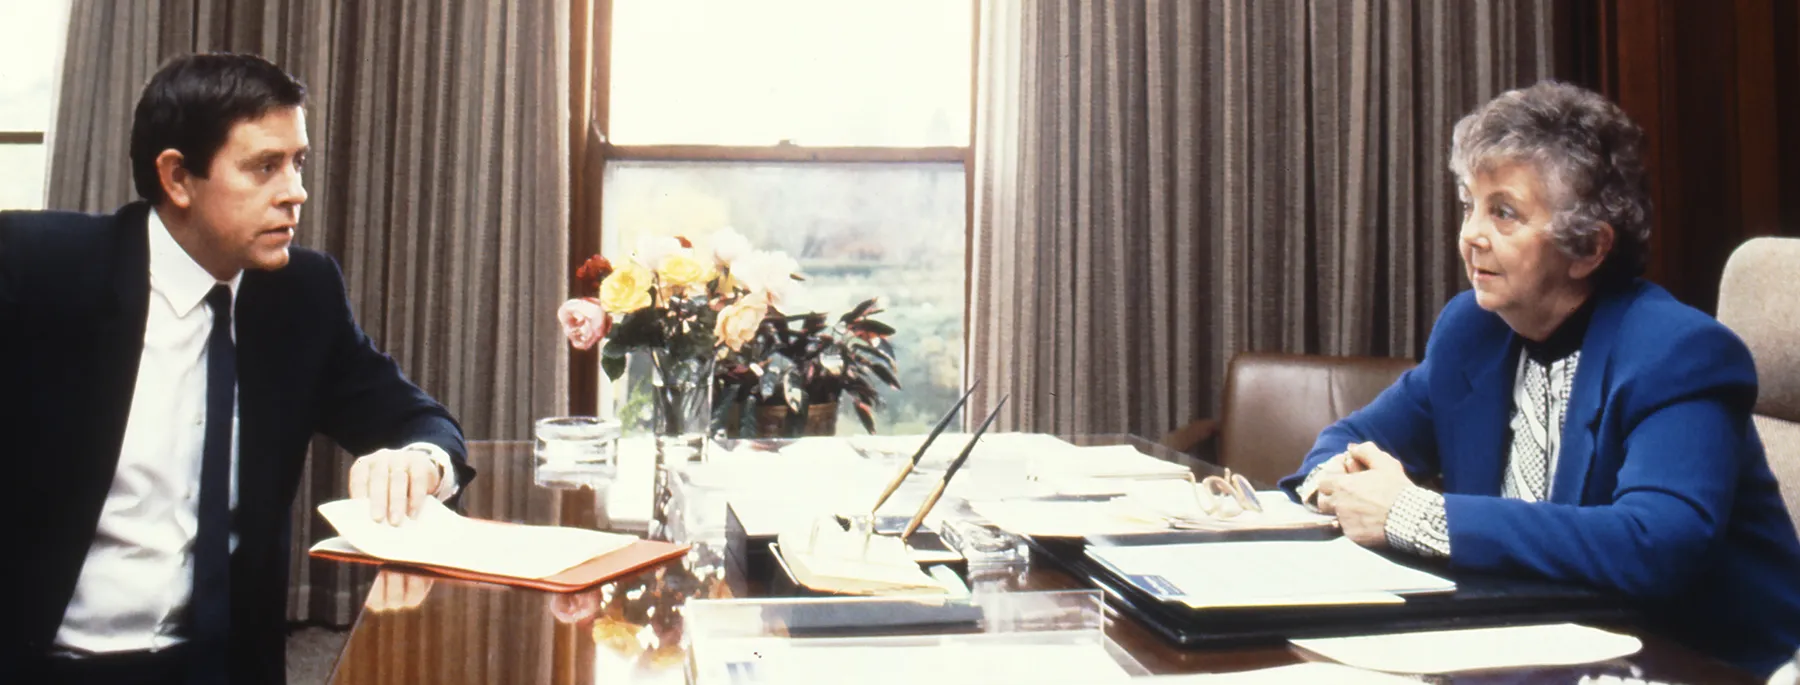 This professional colour photograph shows Principal Private Secretary John Porter and Speaker Joan Child sitting across from each other at the Speaker’s desk. John is wearing a dark suit, white shirt and dark tie and Joan is in a white blouse and vibrant blue jacket. They are discussing the daily program for the House of Representatives Chamber. There is a vase of roses, stationery and paperwork on the desk. In the background the curtains have been drawn to reveal a large east-facing window.